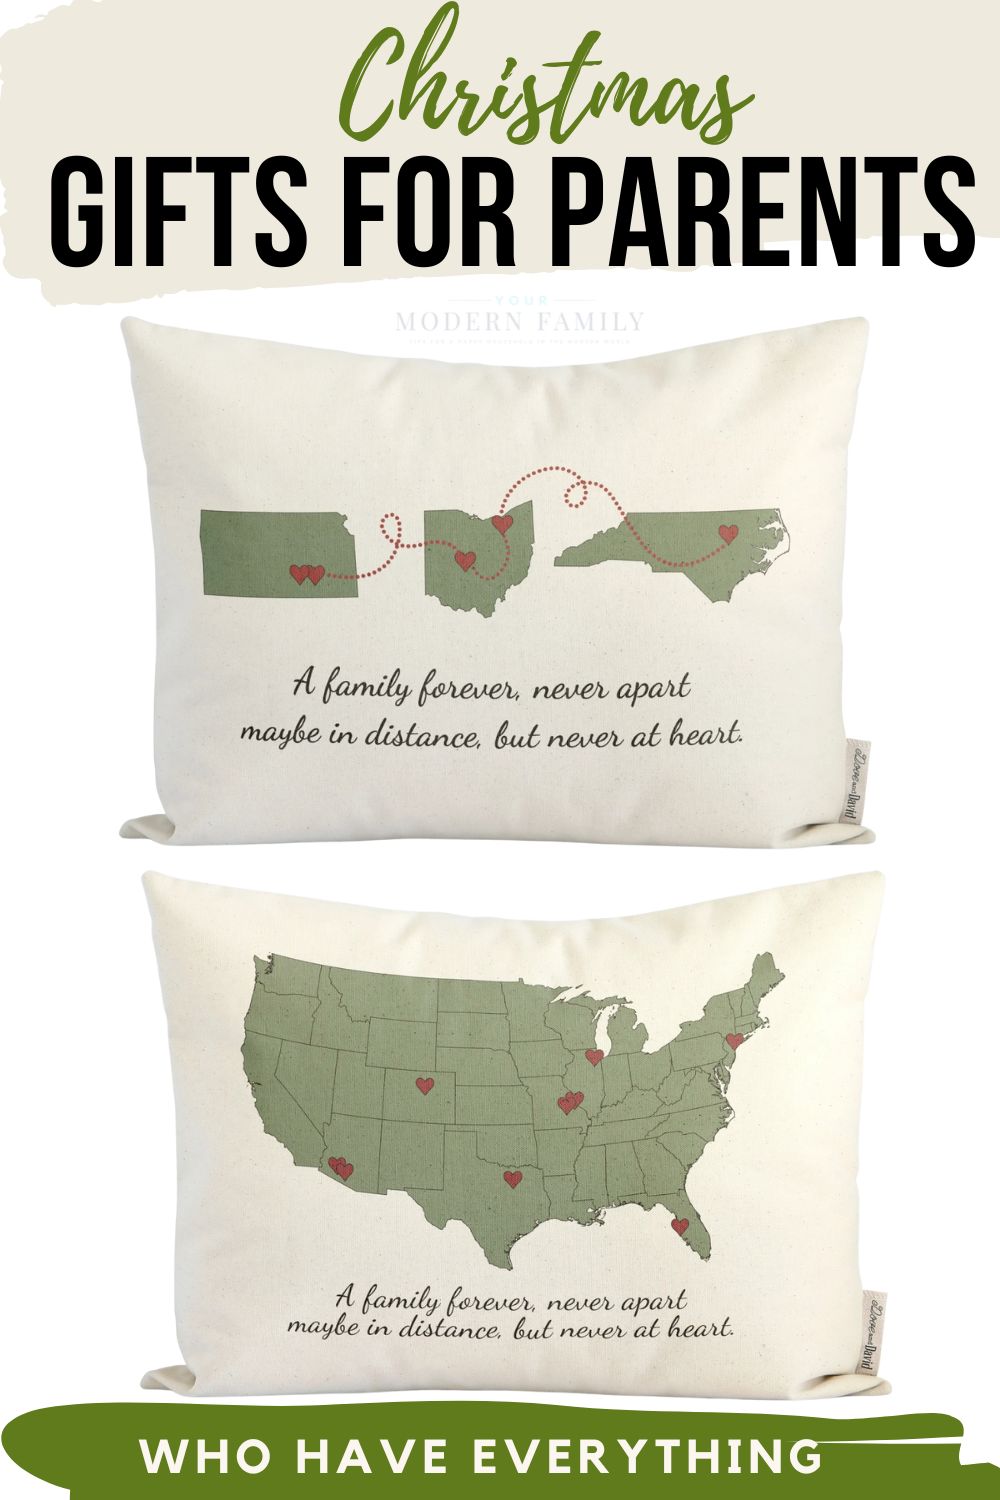 Christmas gift idea for parents who have everything - customized pillows with writing